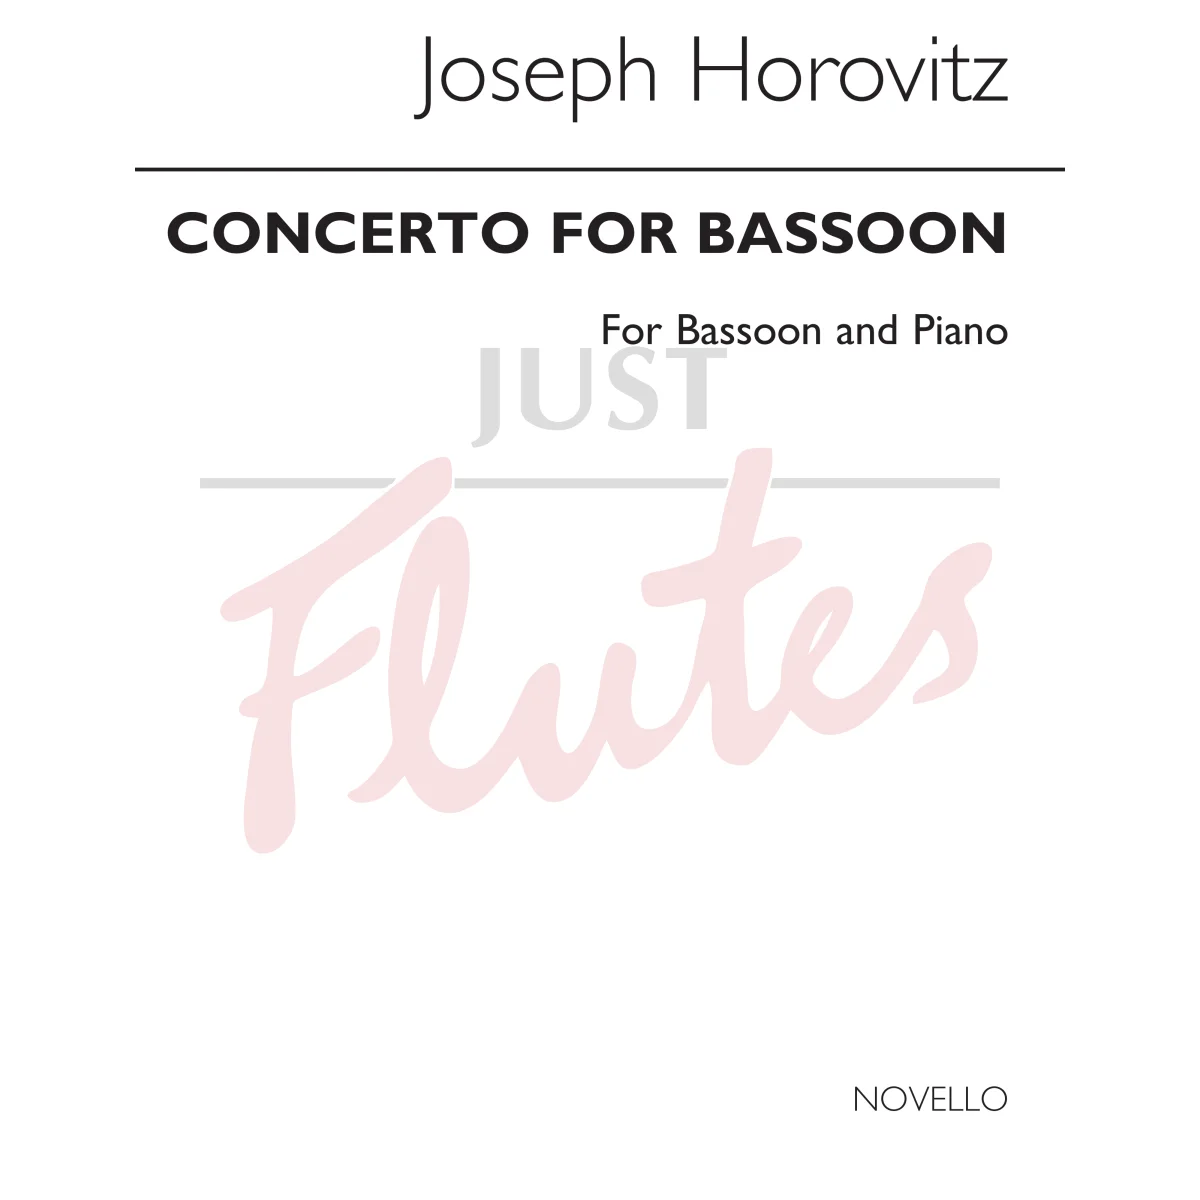 Concerto for Bassoon and Piano